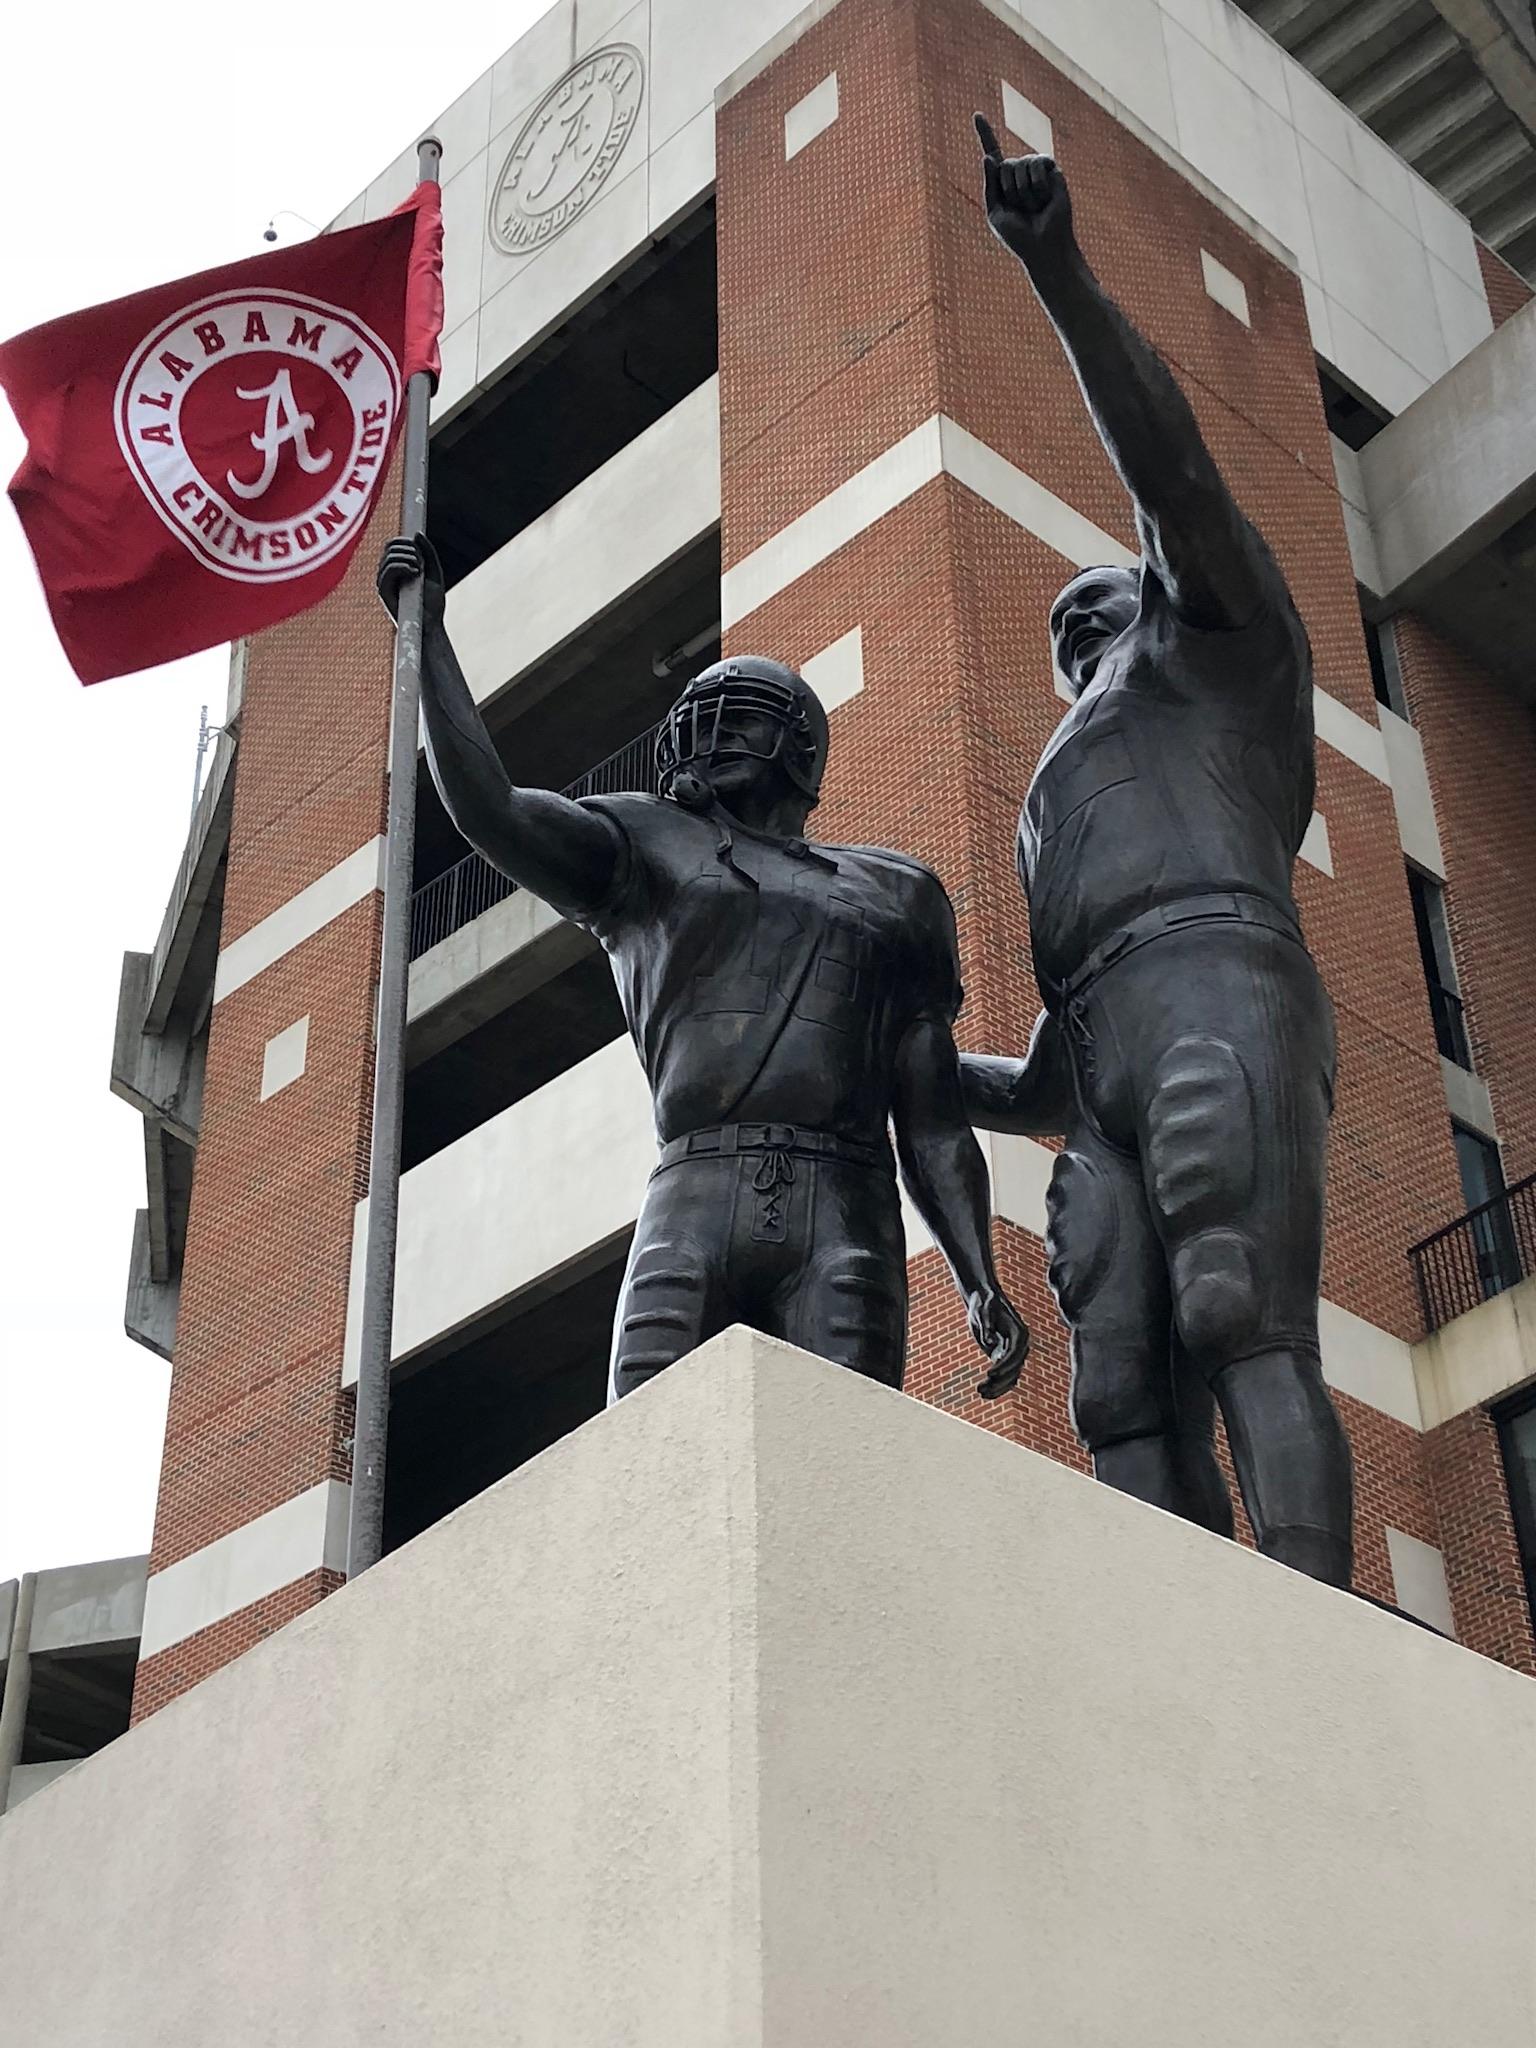 Statues adorn the “Walk of Champions” outside of the University of Alabama’s Bryant-Denny football stadium, the seventh-largest stadium in the US.